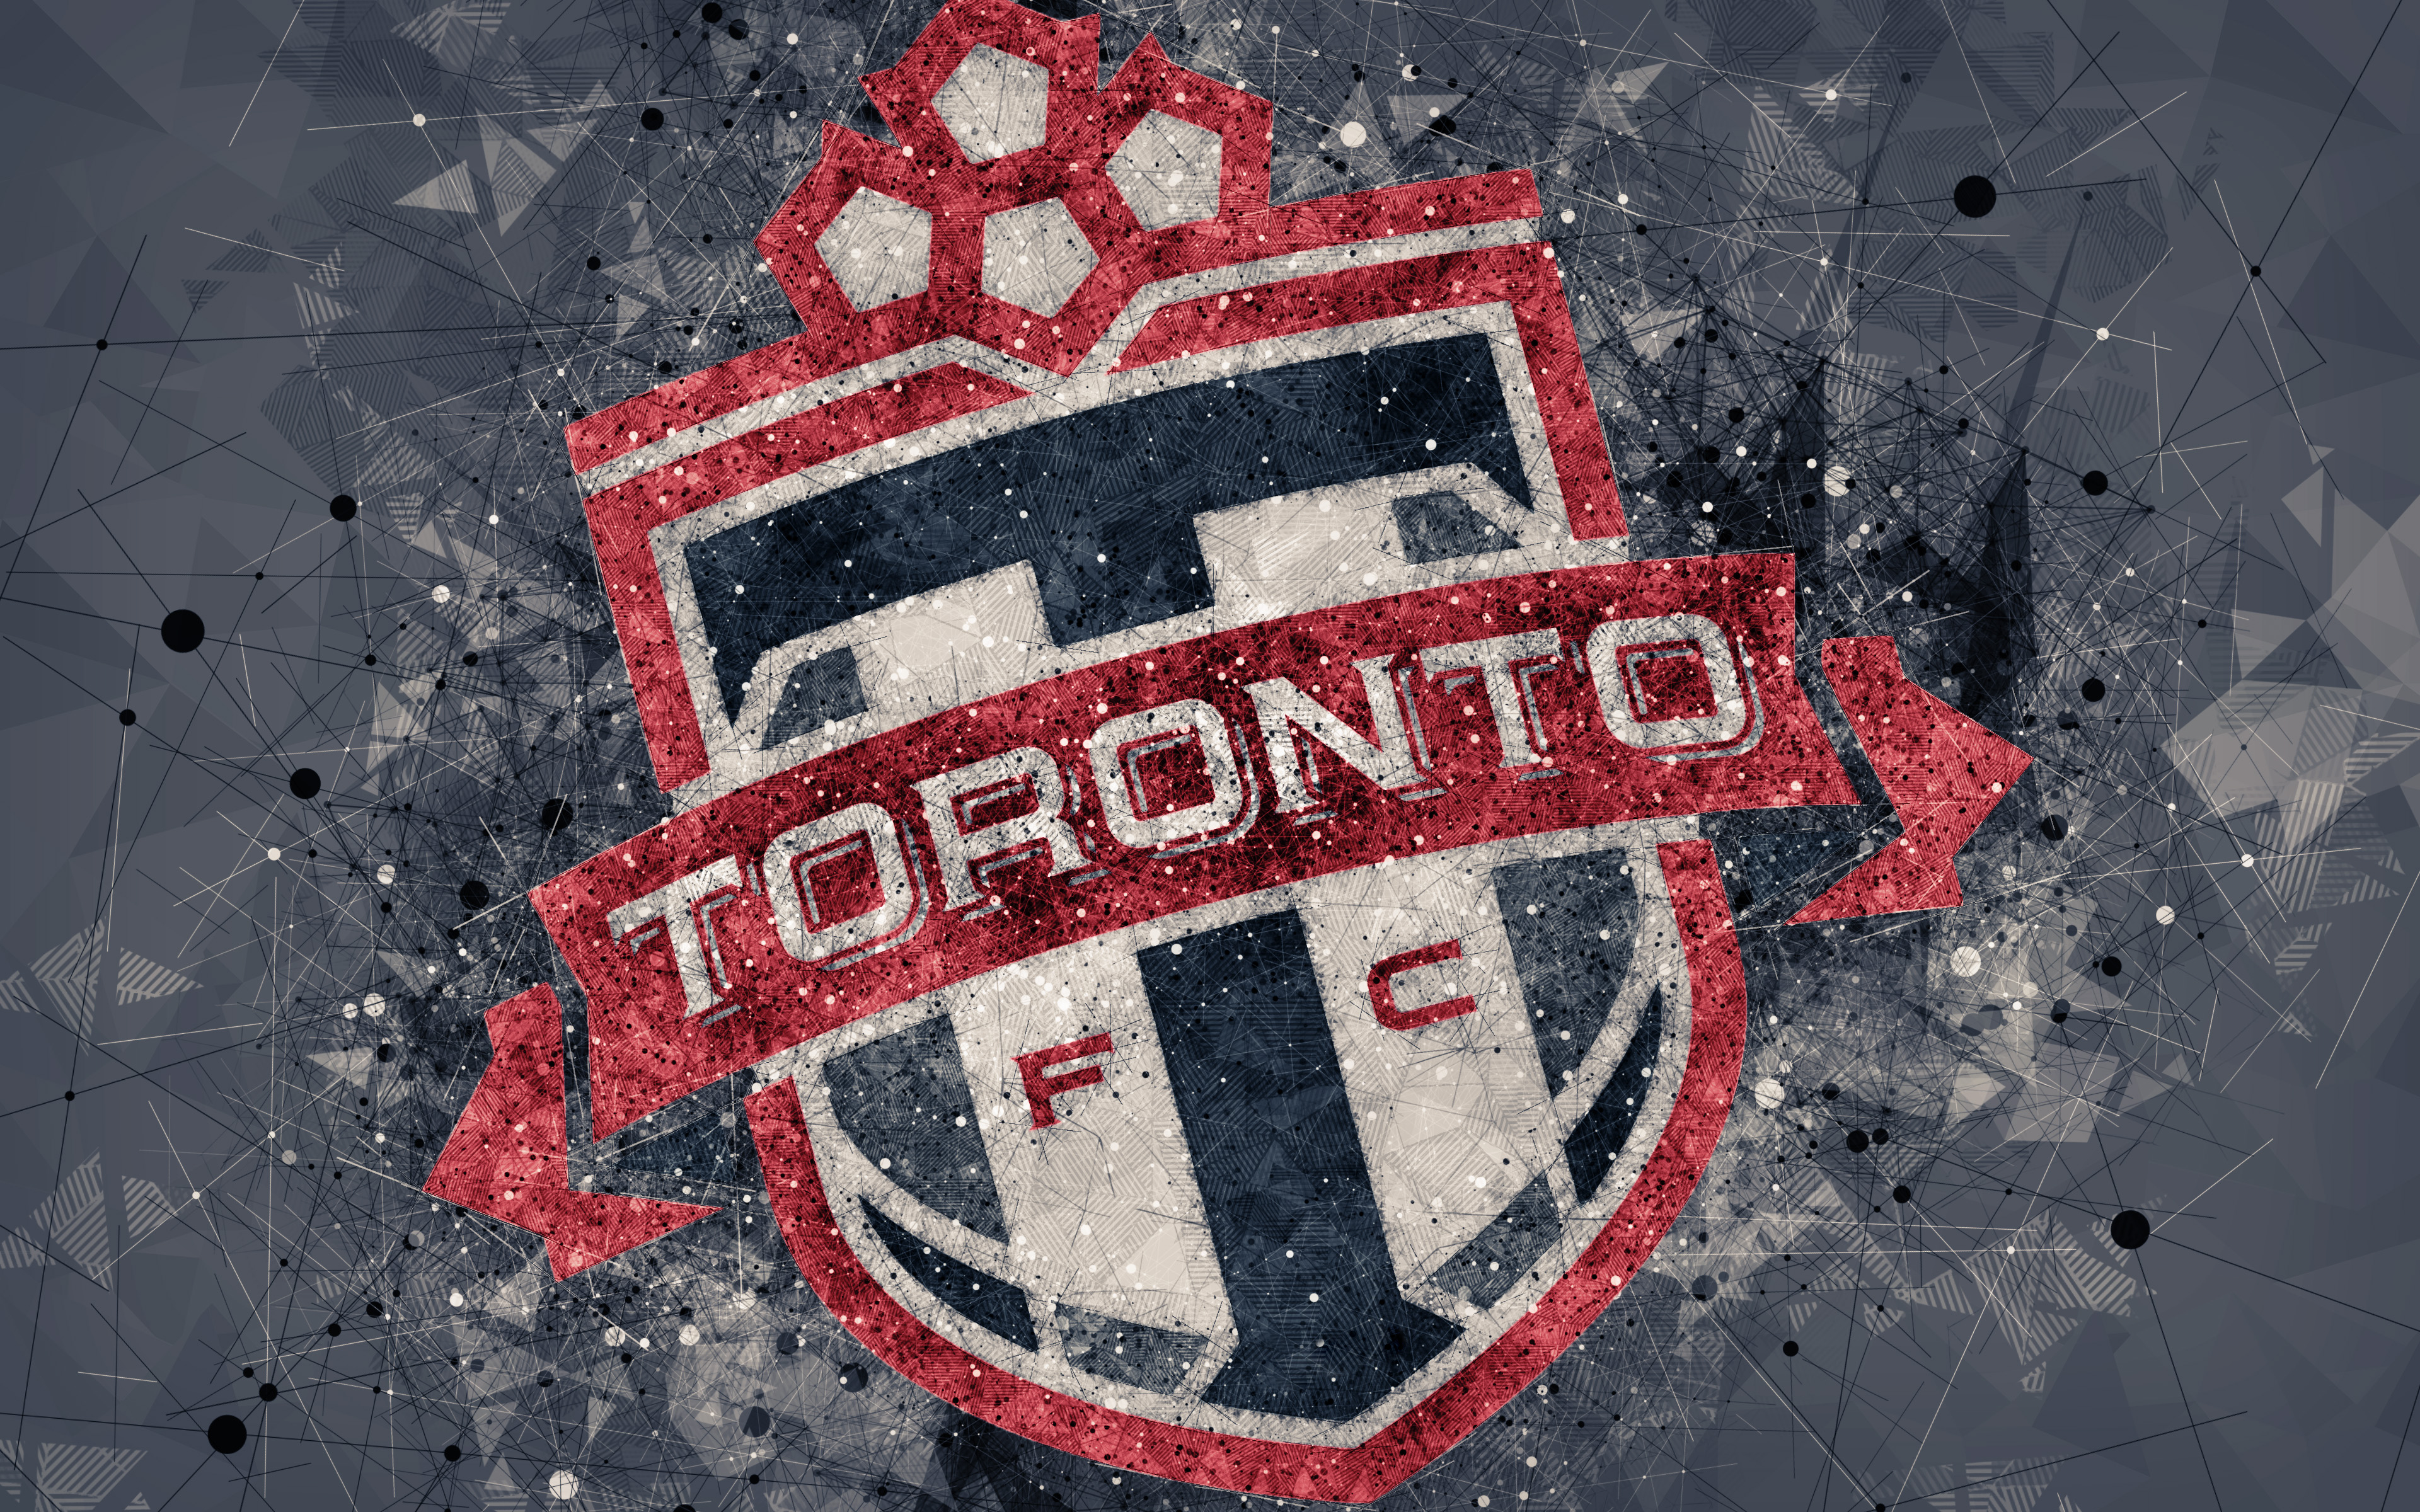 Free download Toronto Fc Wallpaper Full HD Wallpapers [1152x942] for your  Desktop, Mobile & Tablet, Explore 40+ Toronto FC Wallpapers